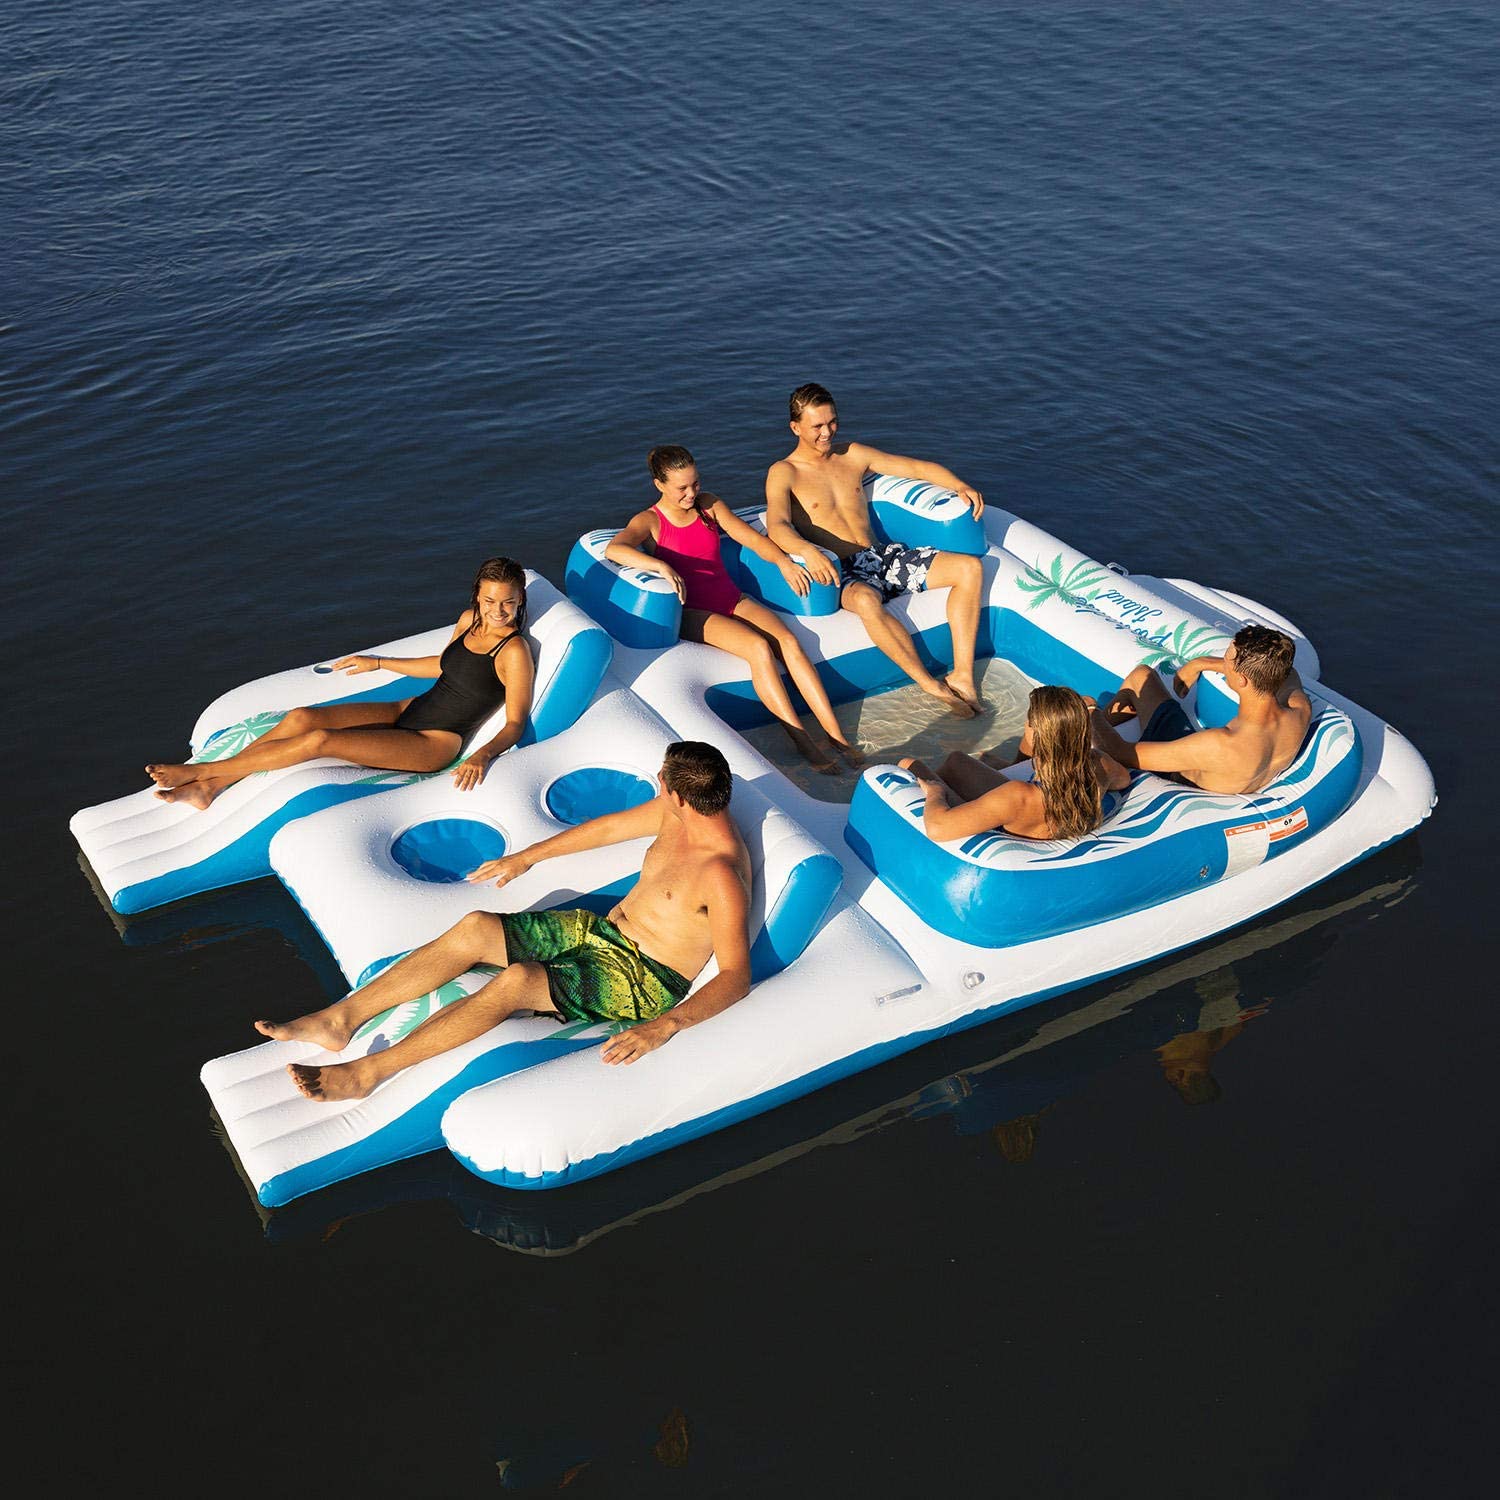 TROPICAL TAHITI INFLATABLE 6-PERSON FLOATING ISLAND POOL LAKE PARTY FLOAT RAFT 